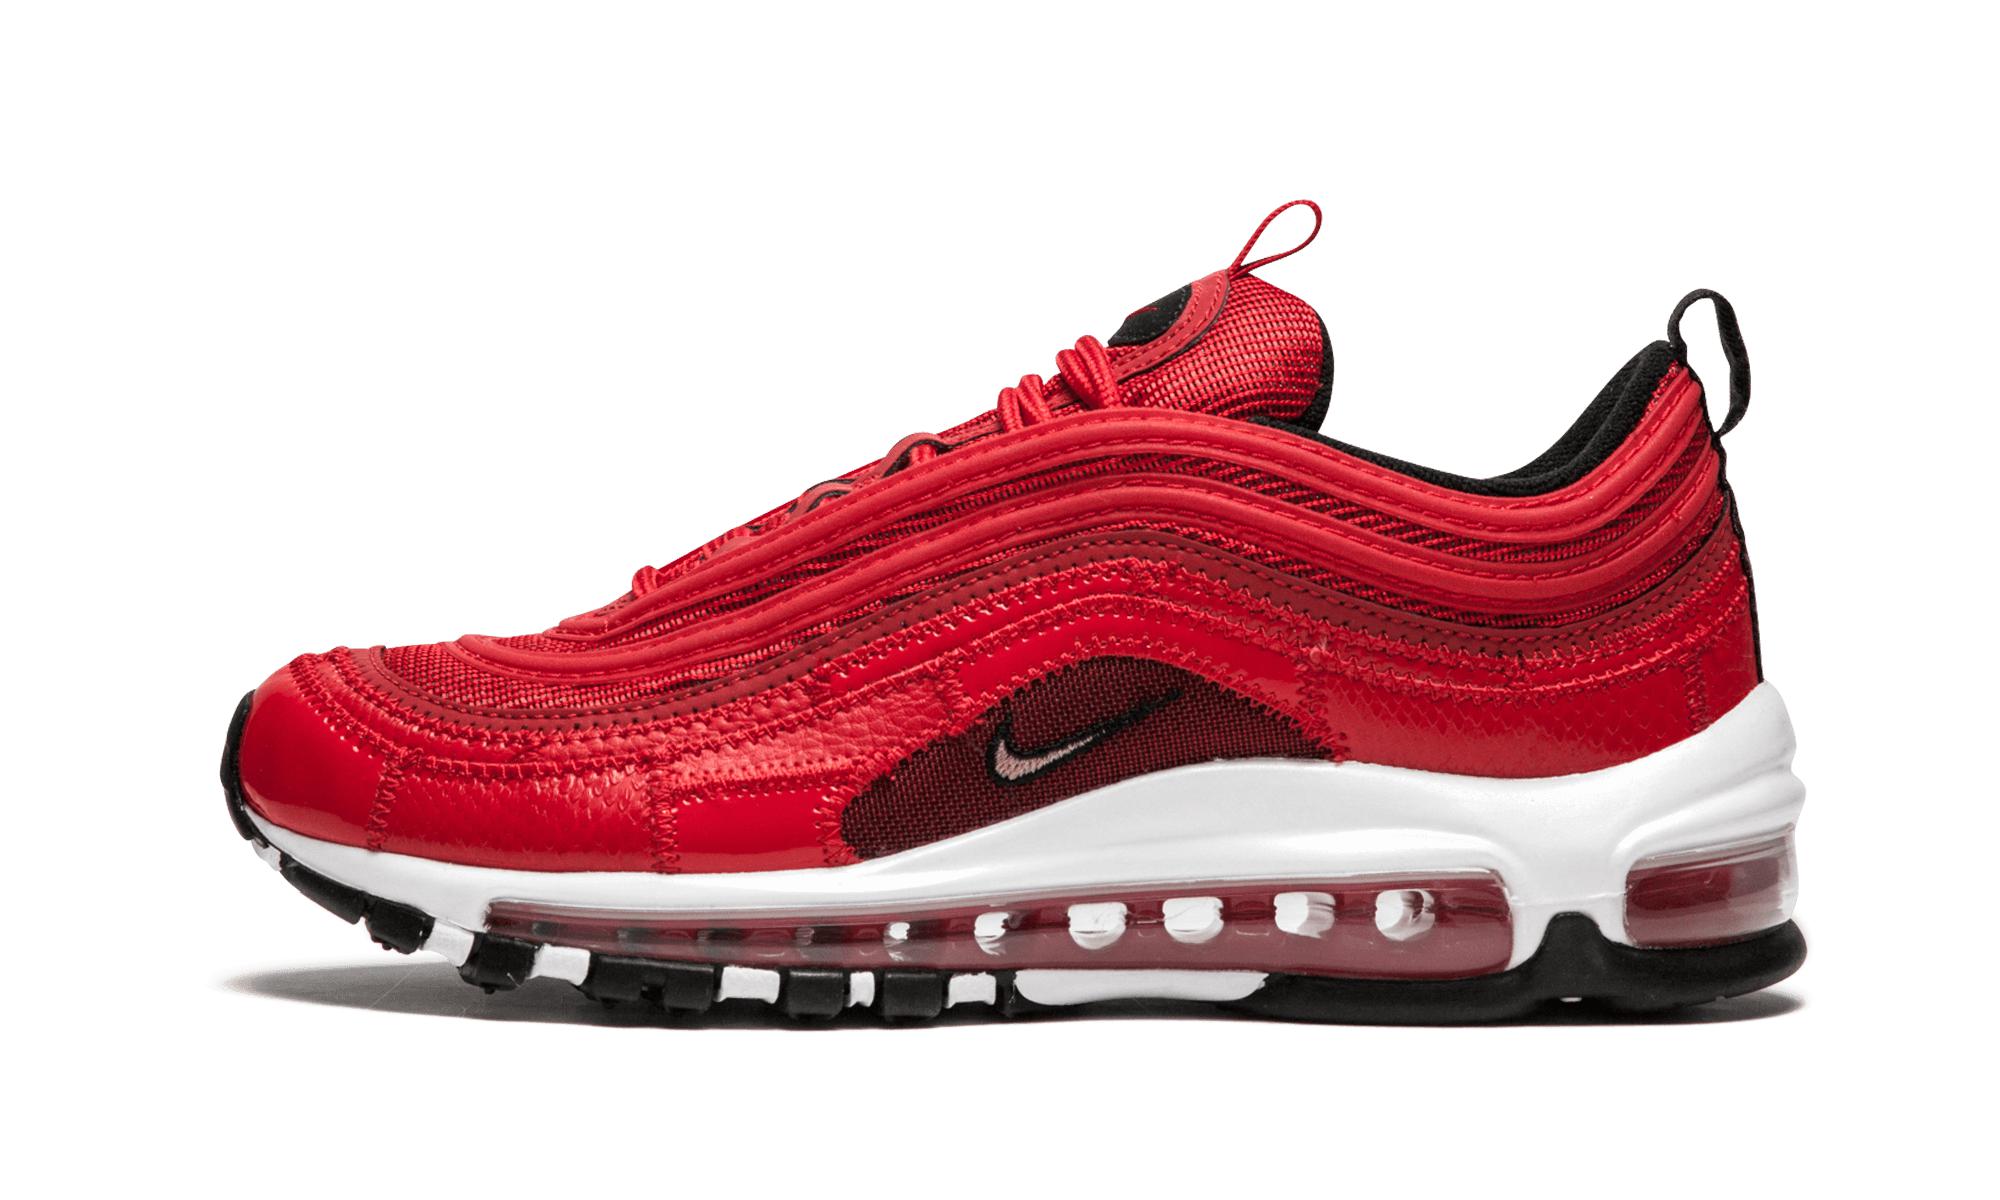 Nike Air Max 97 Cr7 Sneakers in Black,Gold,Red,White (Red) for Men - Lyst